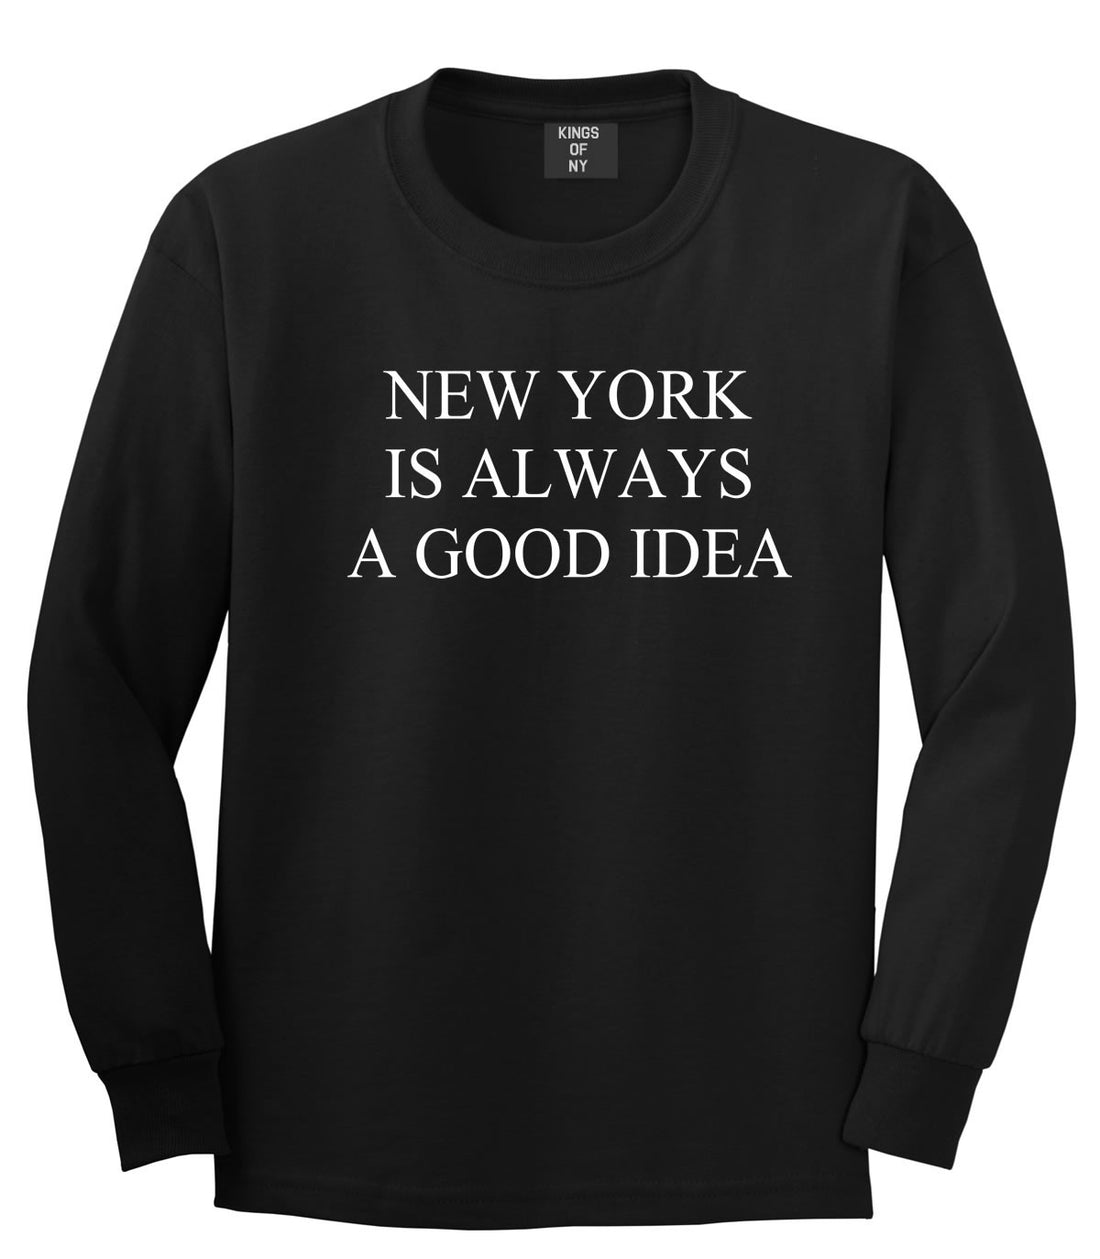 New York Is Always A Good Idea Long Sleeve T-Shirt in Black by Kings Of NY